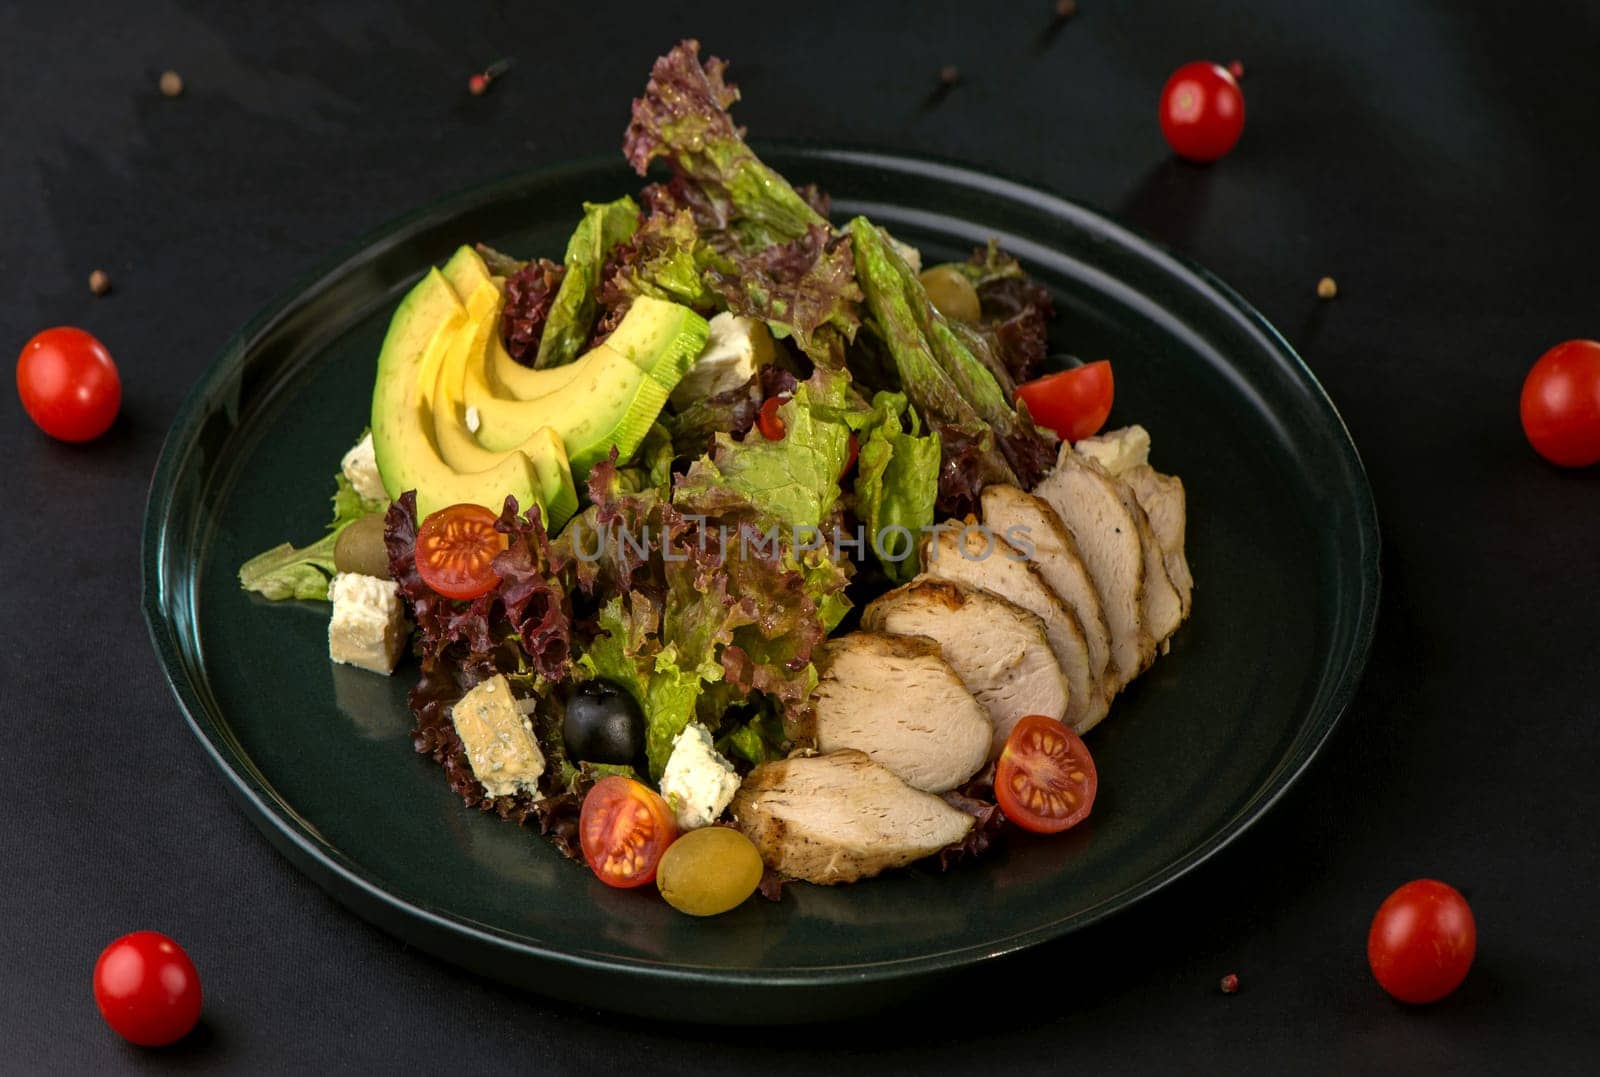 lettuce salad with chicken, avocado and tomatoes on a dark background by aprilphoto